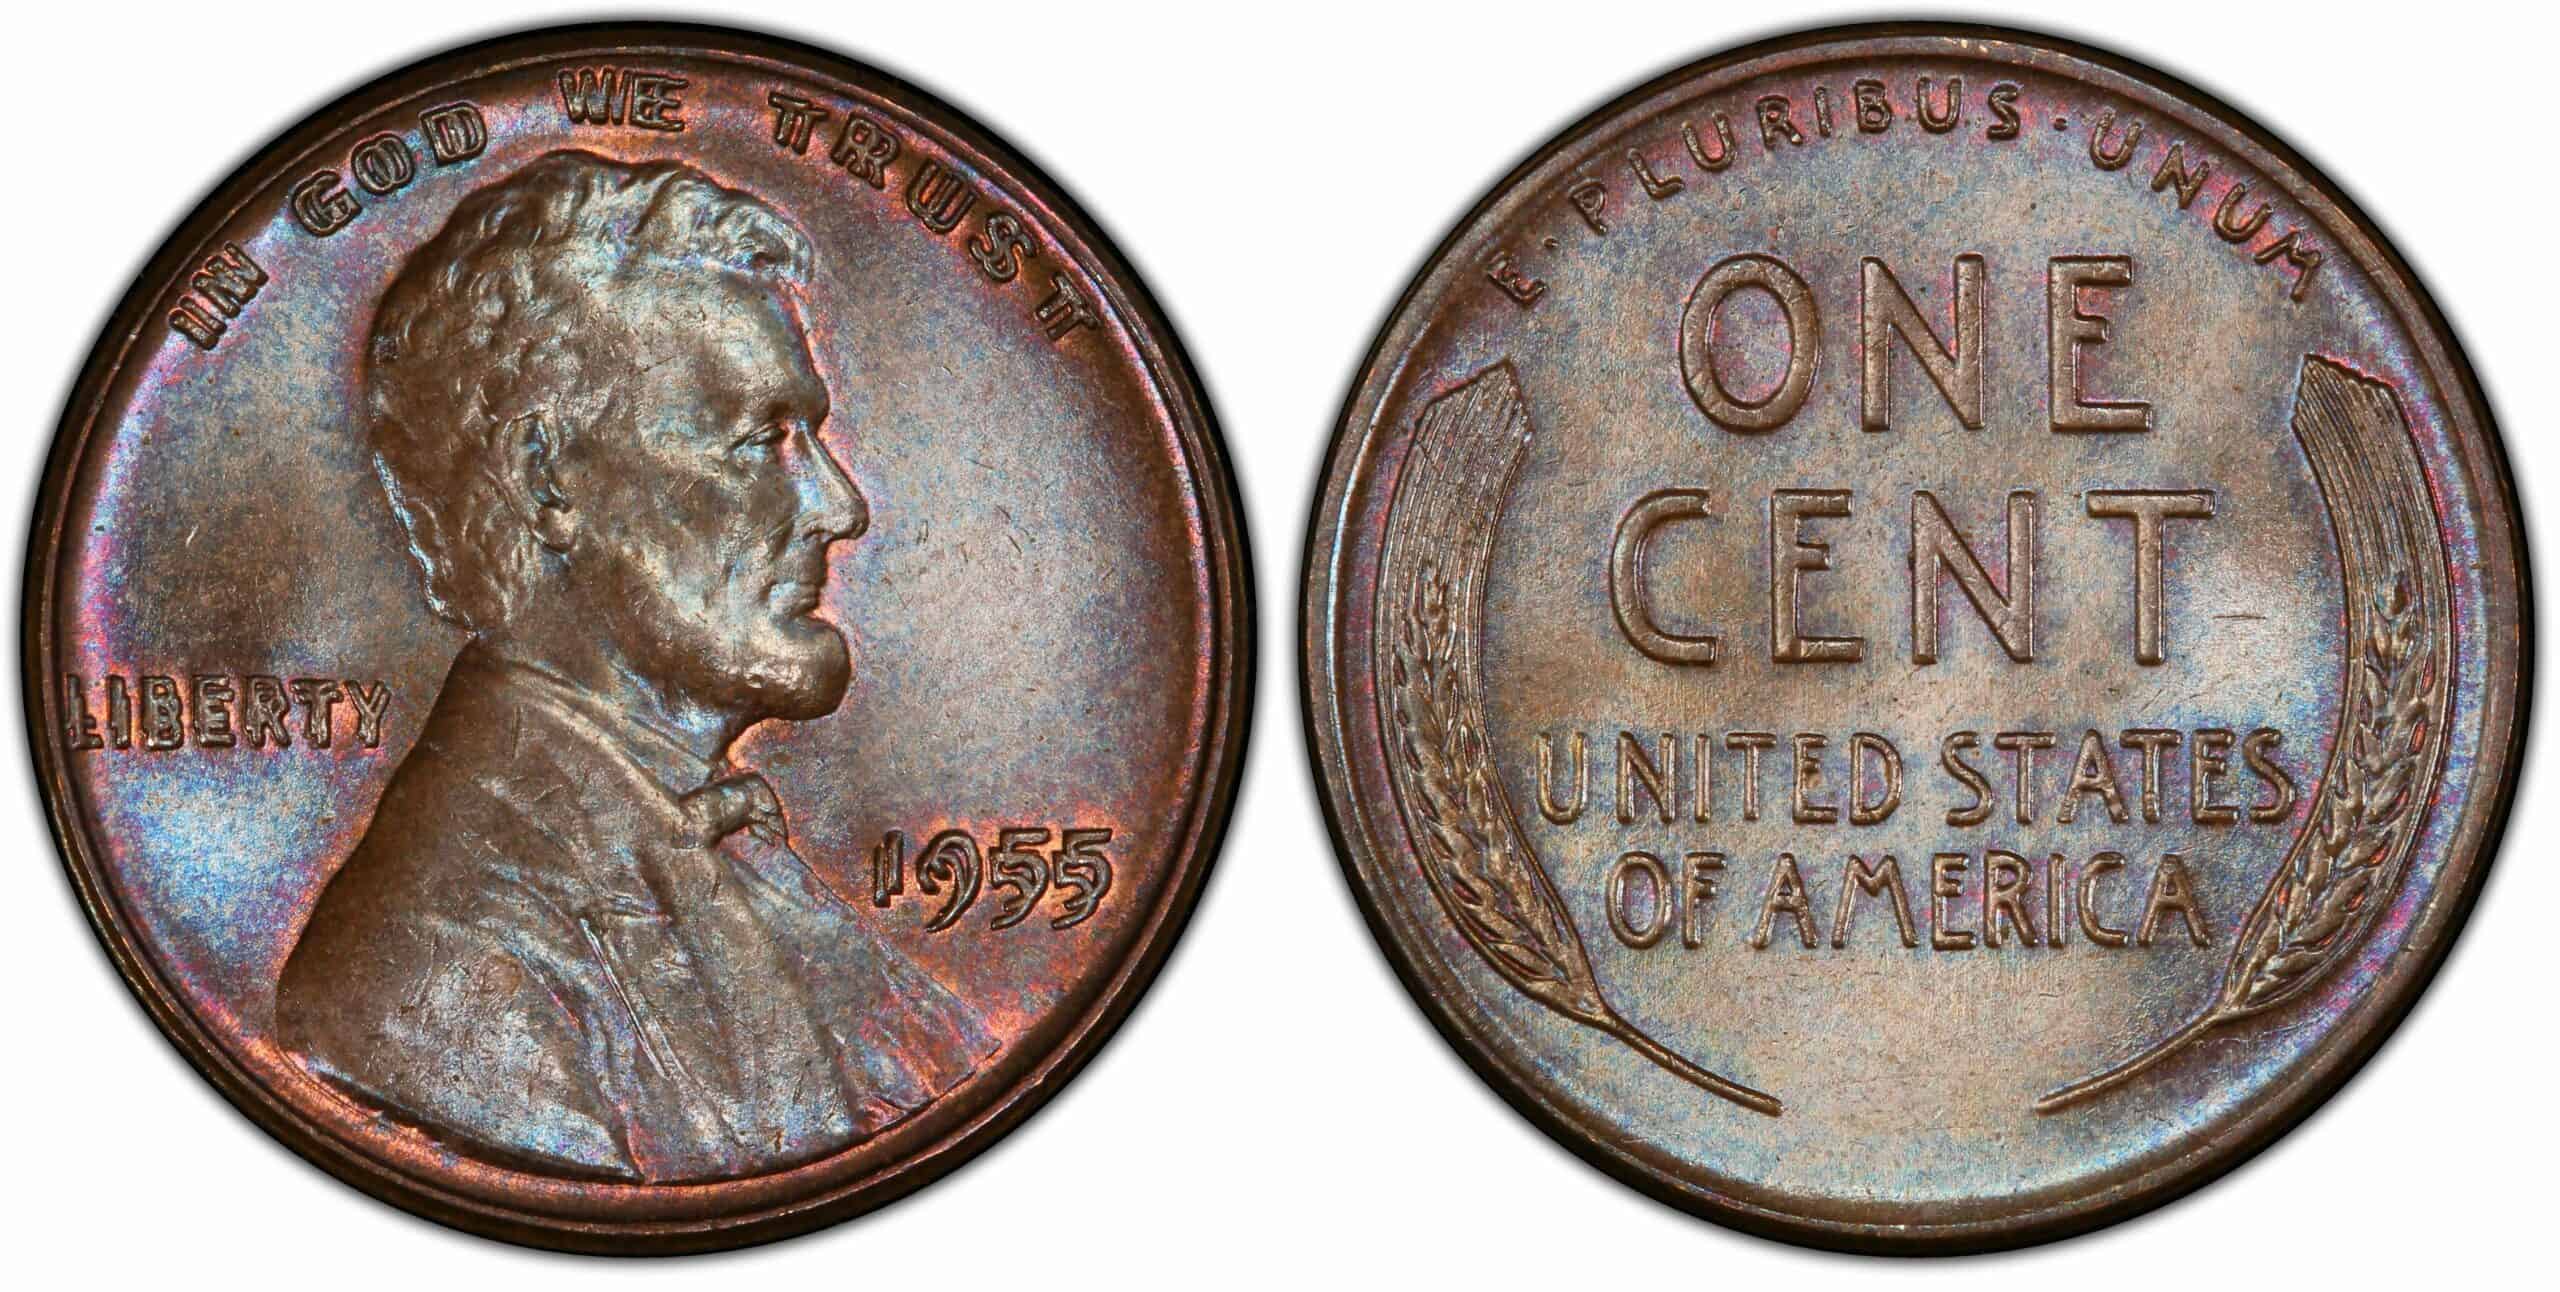 History of 1955 Double Die Penny